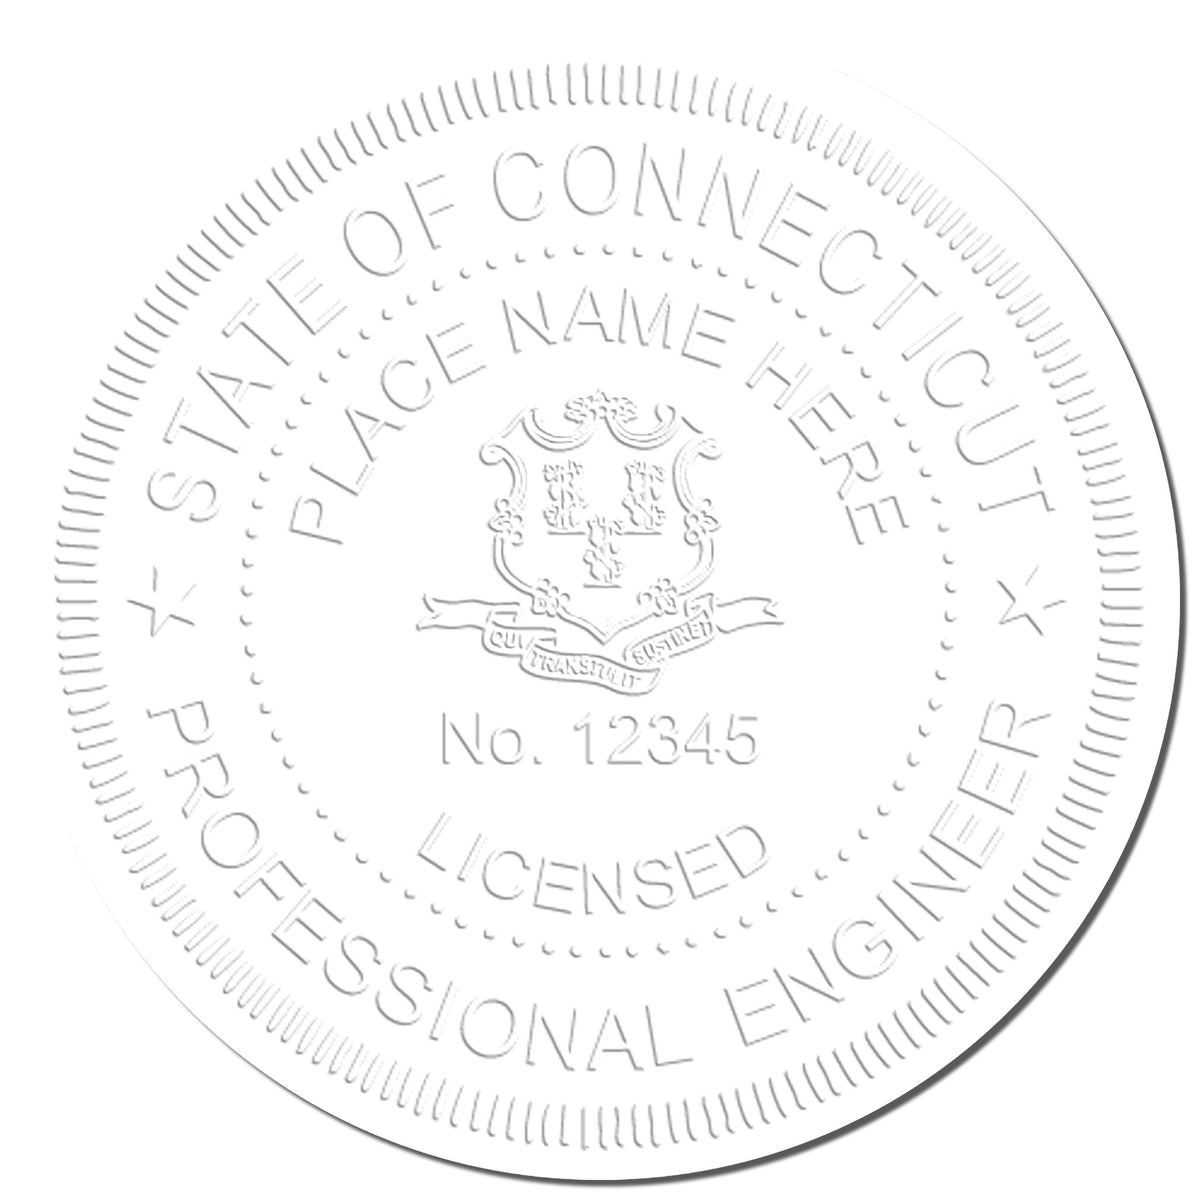 The Soft Connecticut Professional Engineer Seal stamp impression comes to life with a crisp, detailed photo on paper - showcasing true professional quality.